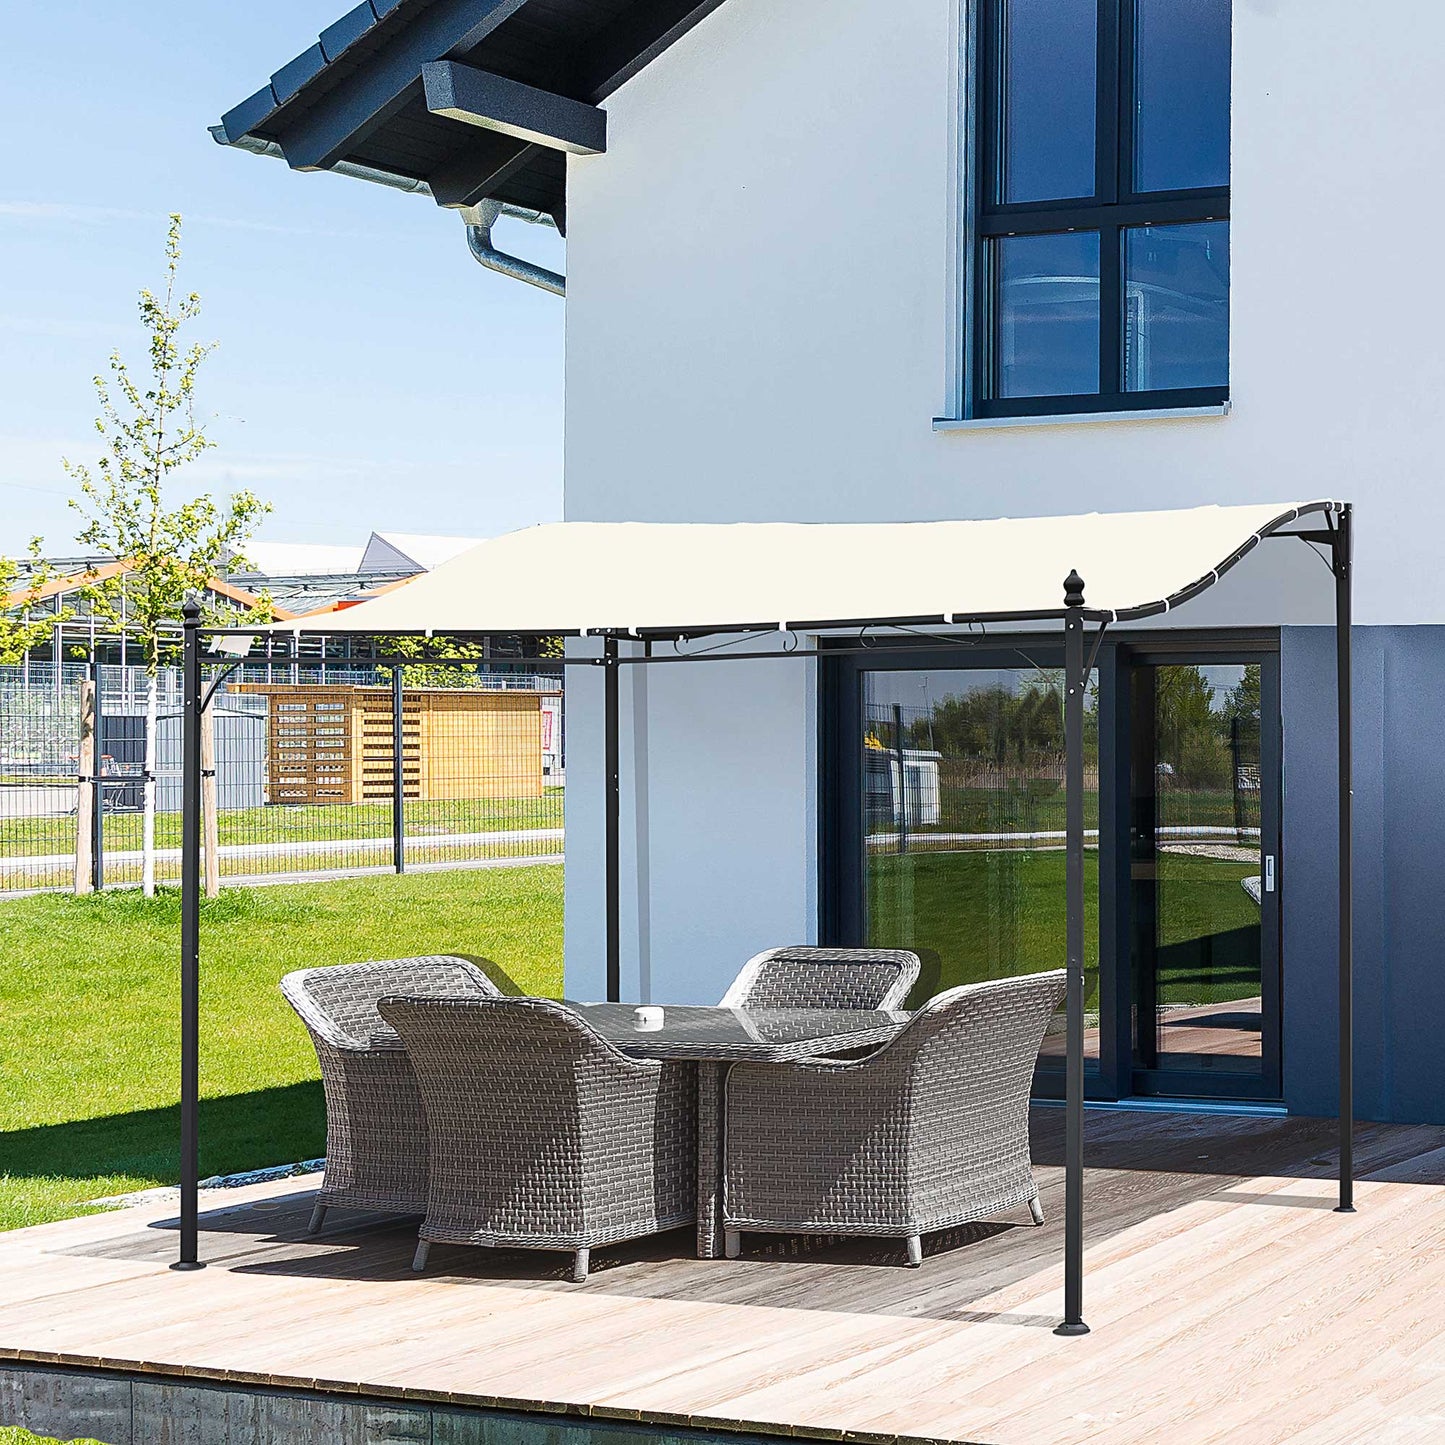 Outsunny 4 x 3 Meters Canopy Metal Wall Gazebo Awning Garden Marquee Shelter Door Porch - Cream